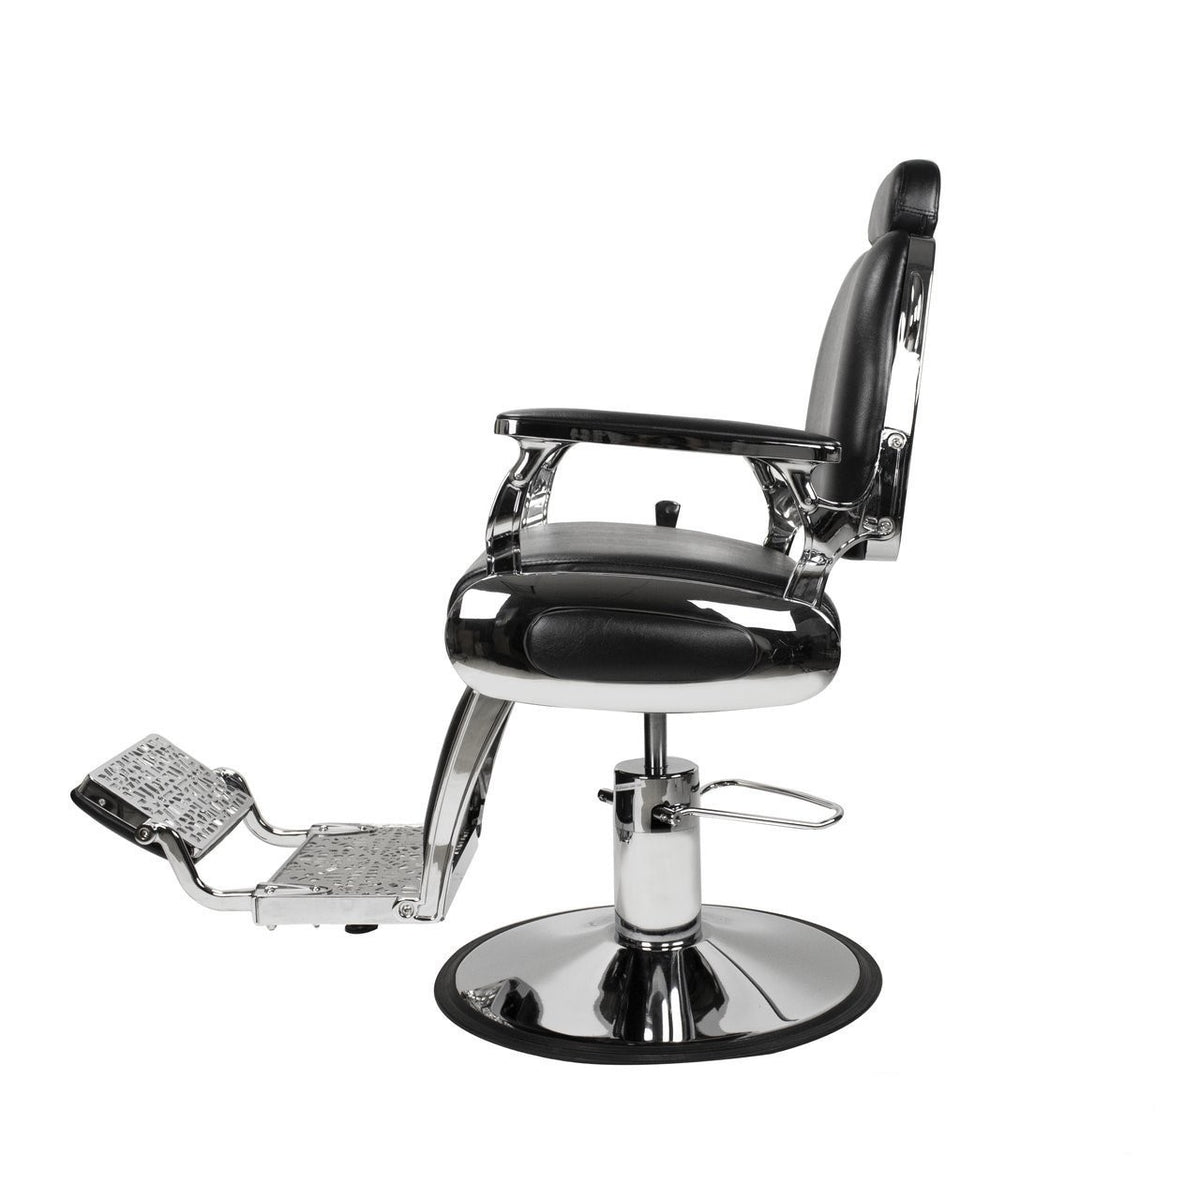 Berkeley Berkeley Roosevelt Barber Chair Barber Chairs - ChairsThatGive